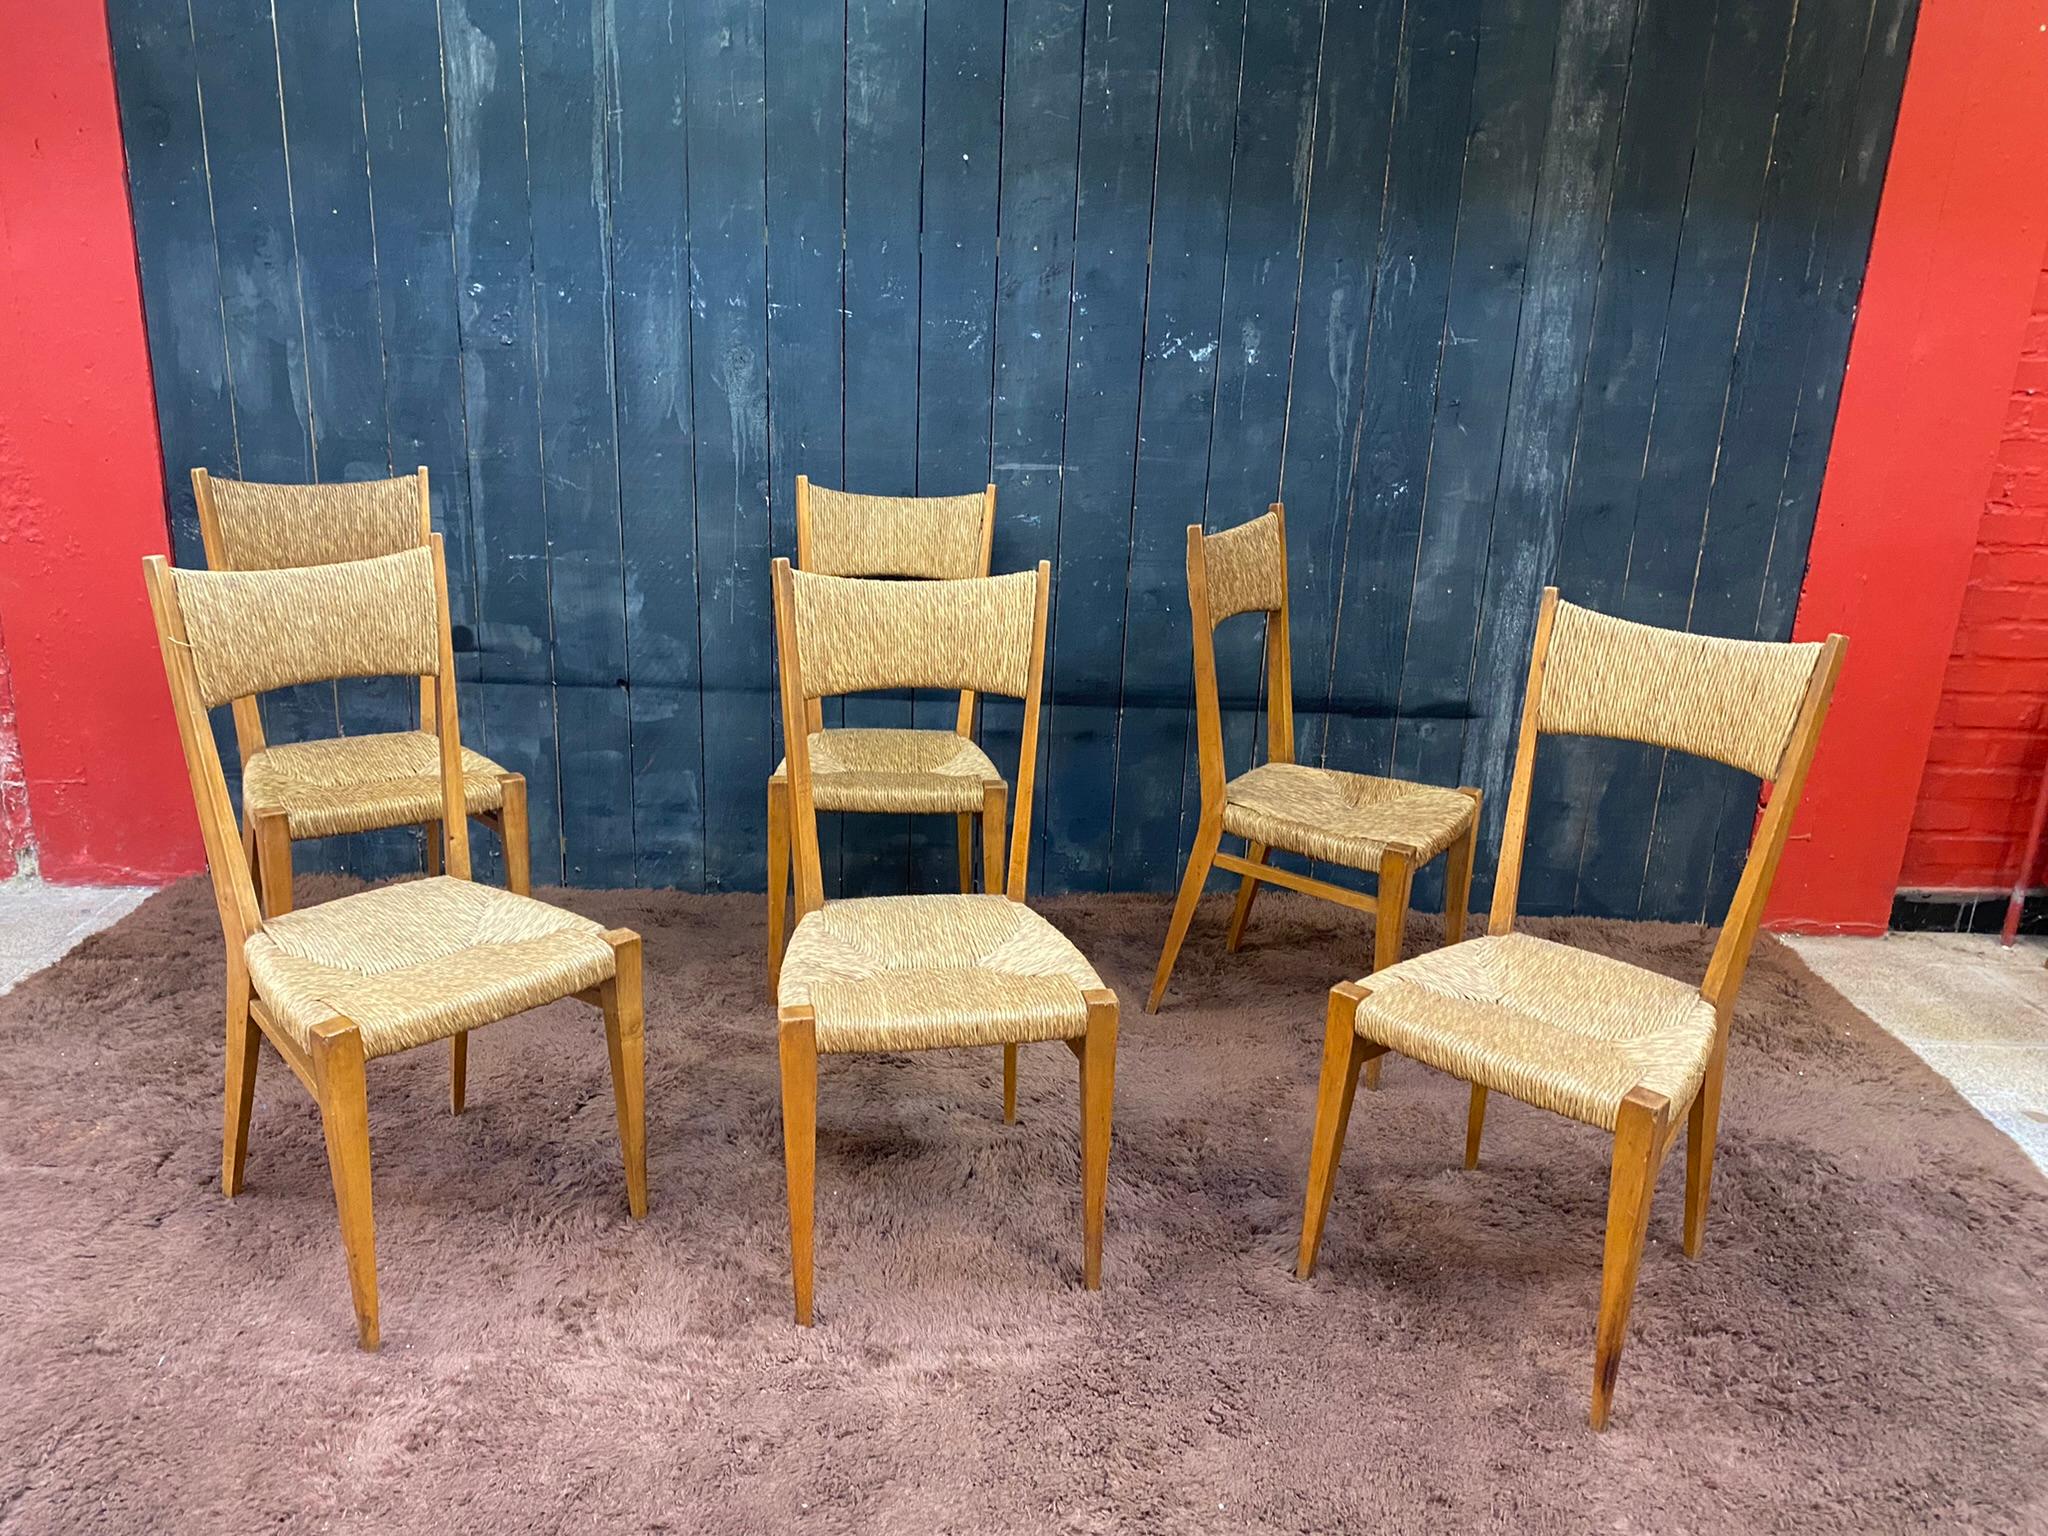 Series of 6 Elegant Oak Chairs, French Reconstruction Period, circa 1950 In Good Condition For Sale In Saint-Ouen, FR